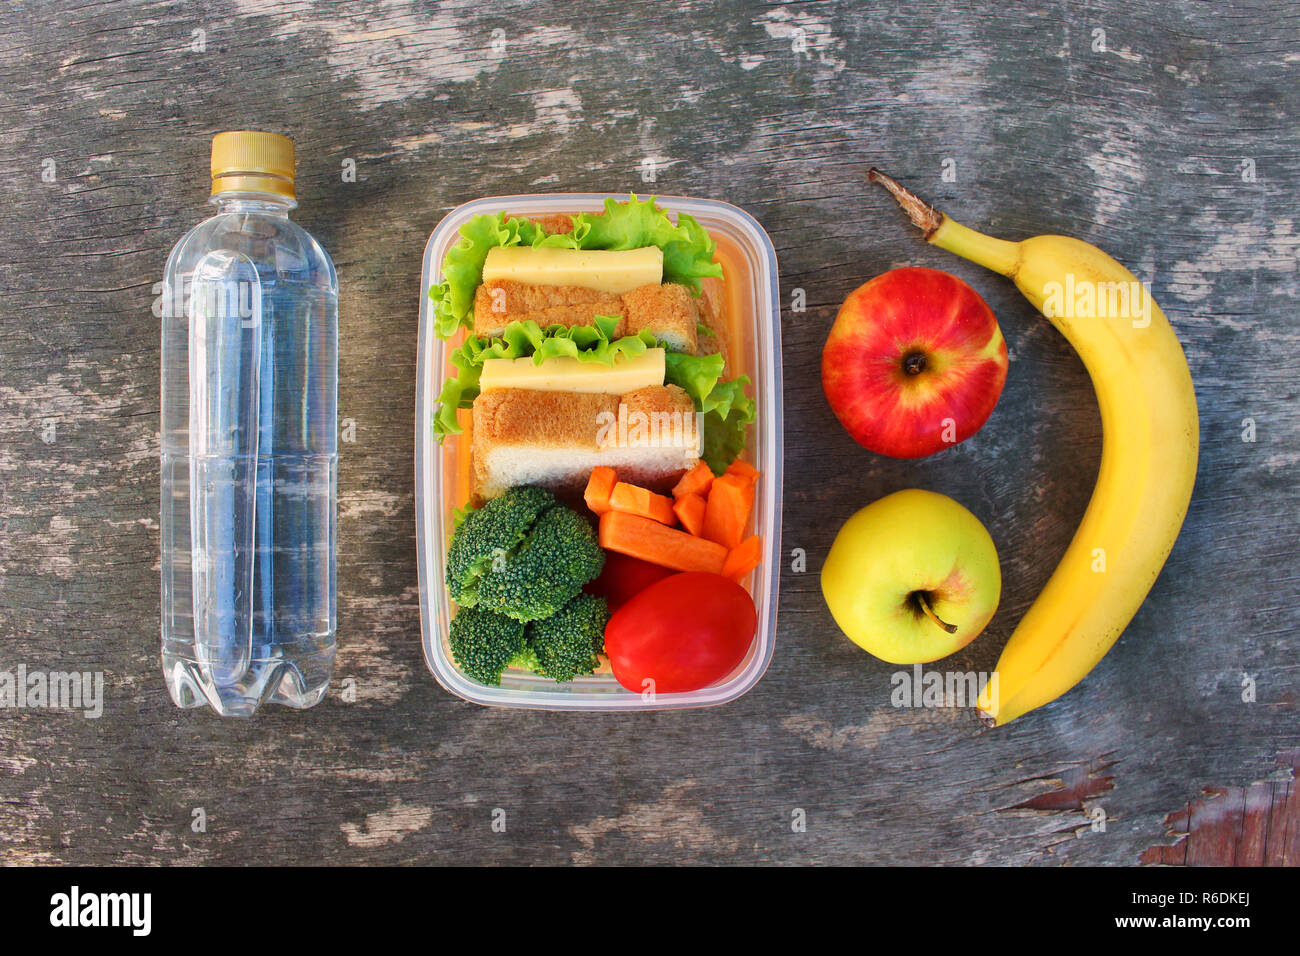 Sandwiches, fruits and vegetables in food box, water on old wooden background. Top view. Flat lay. Stock Photo